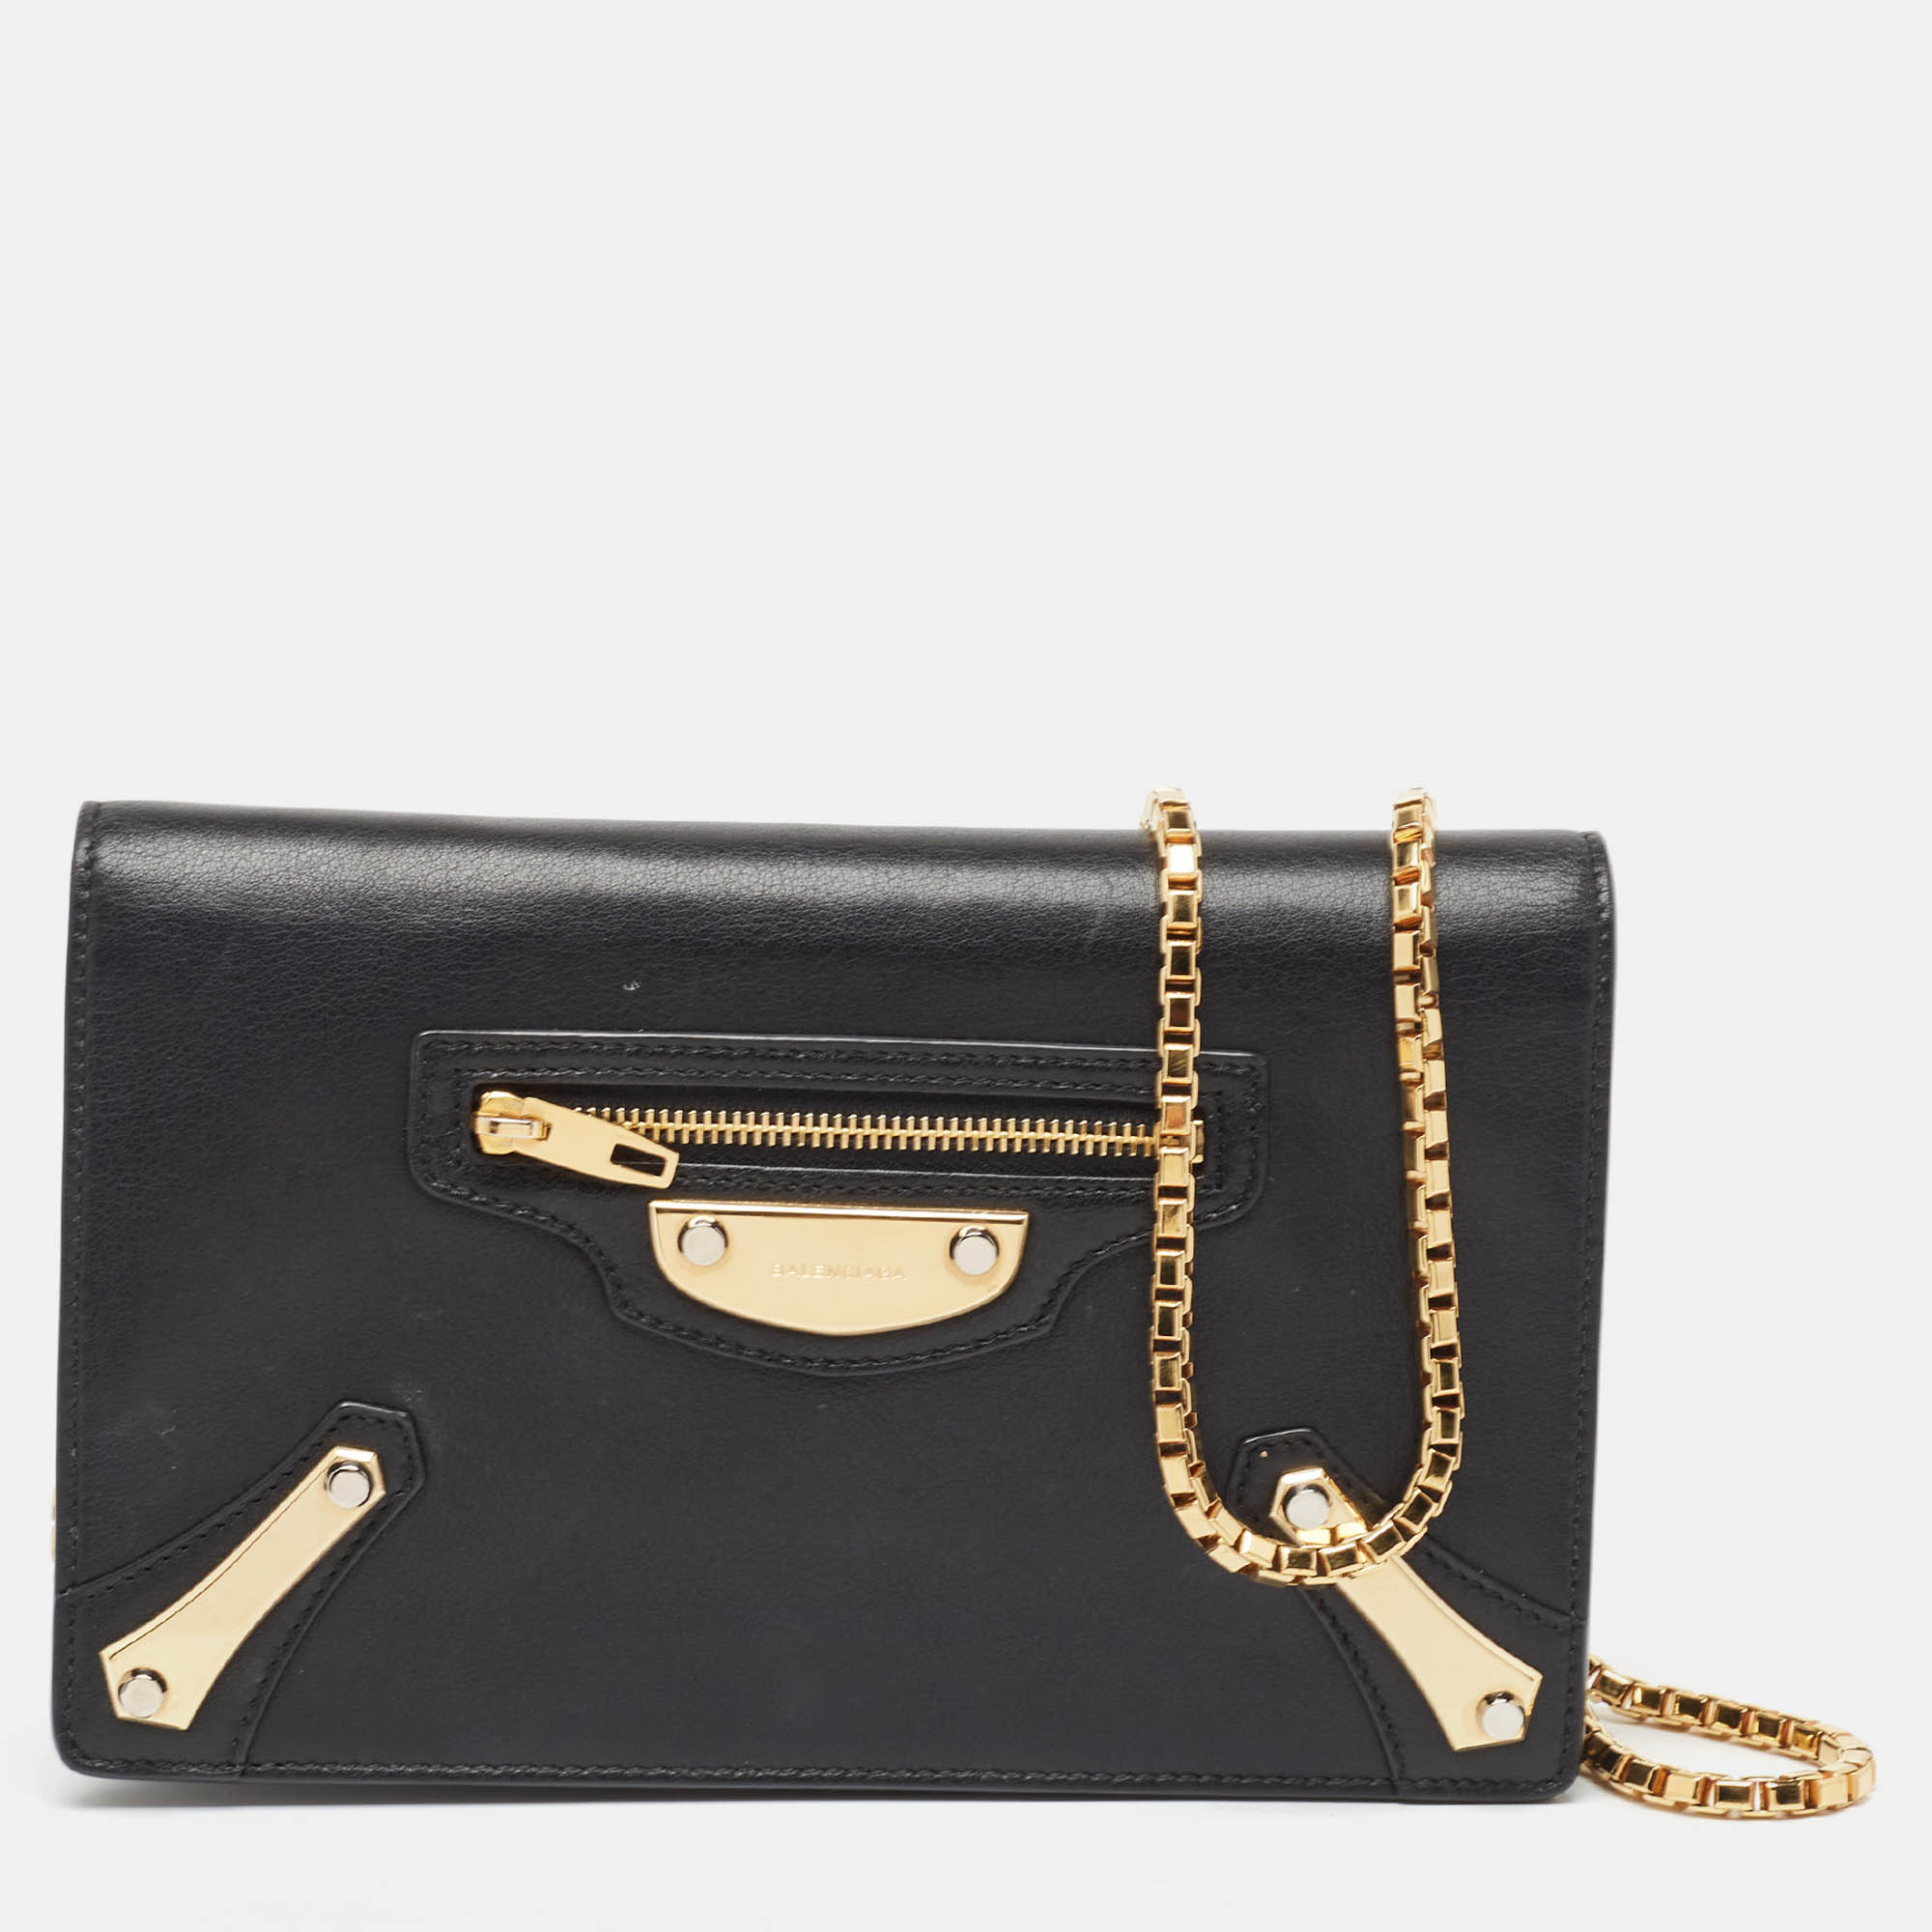 Balenciaga black leather amp plate gold wallet on chain